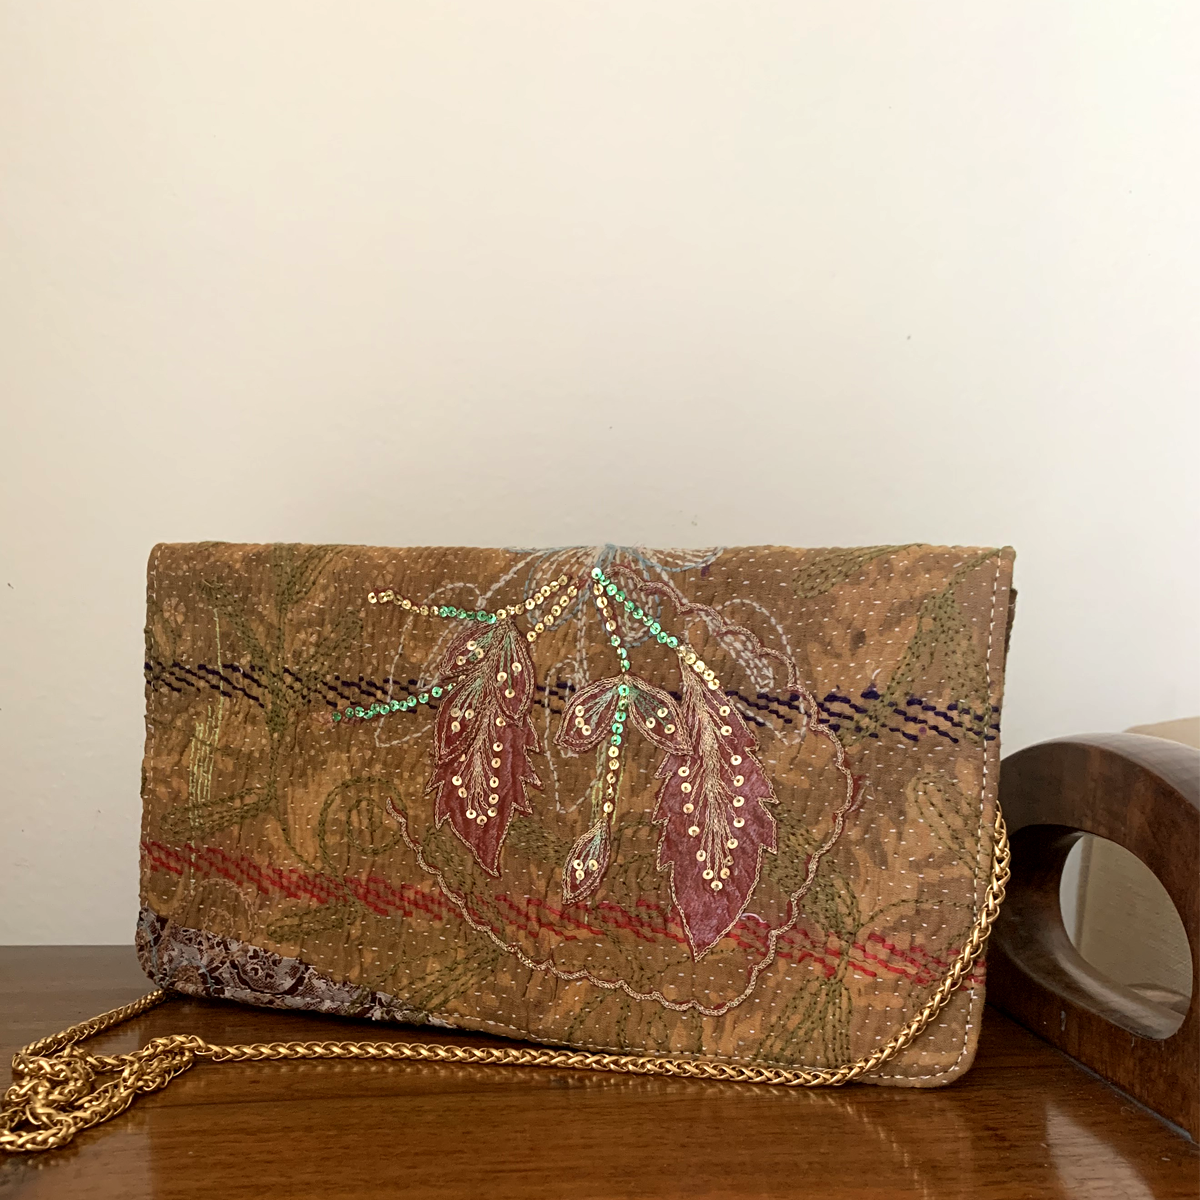 Handcrafted Copper Orange Clutch - Sustainable and Ethical Fashion